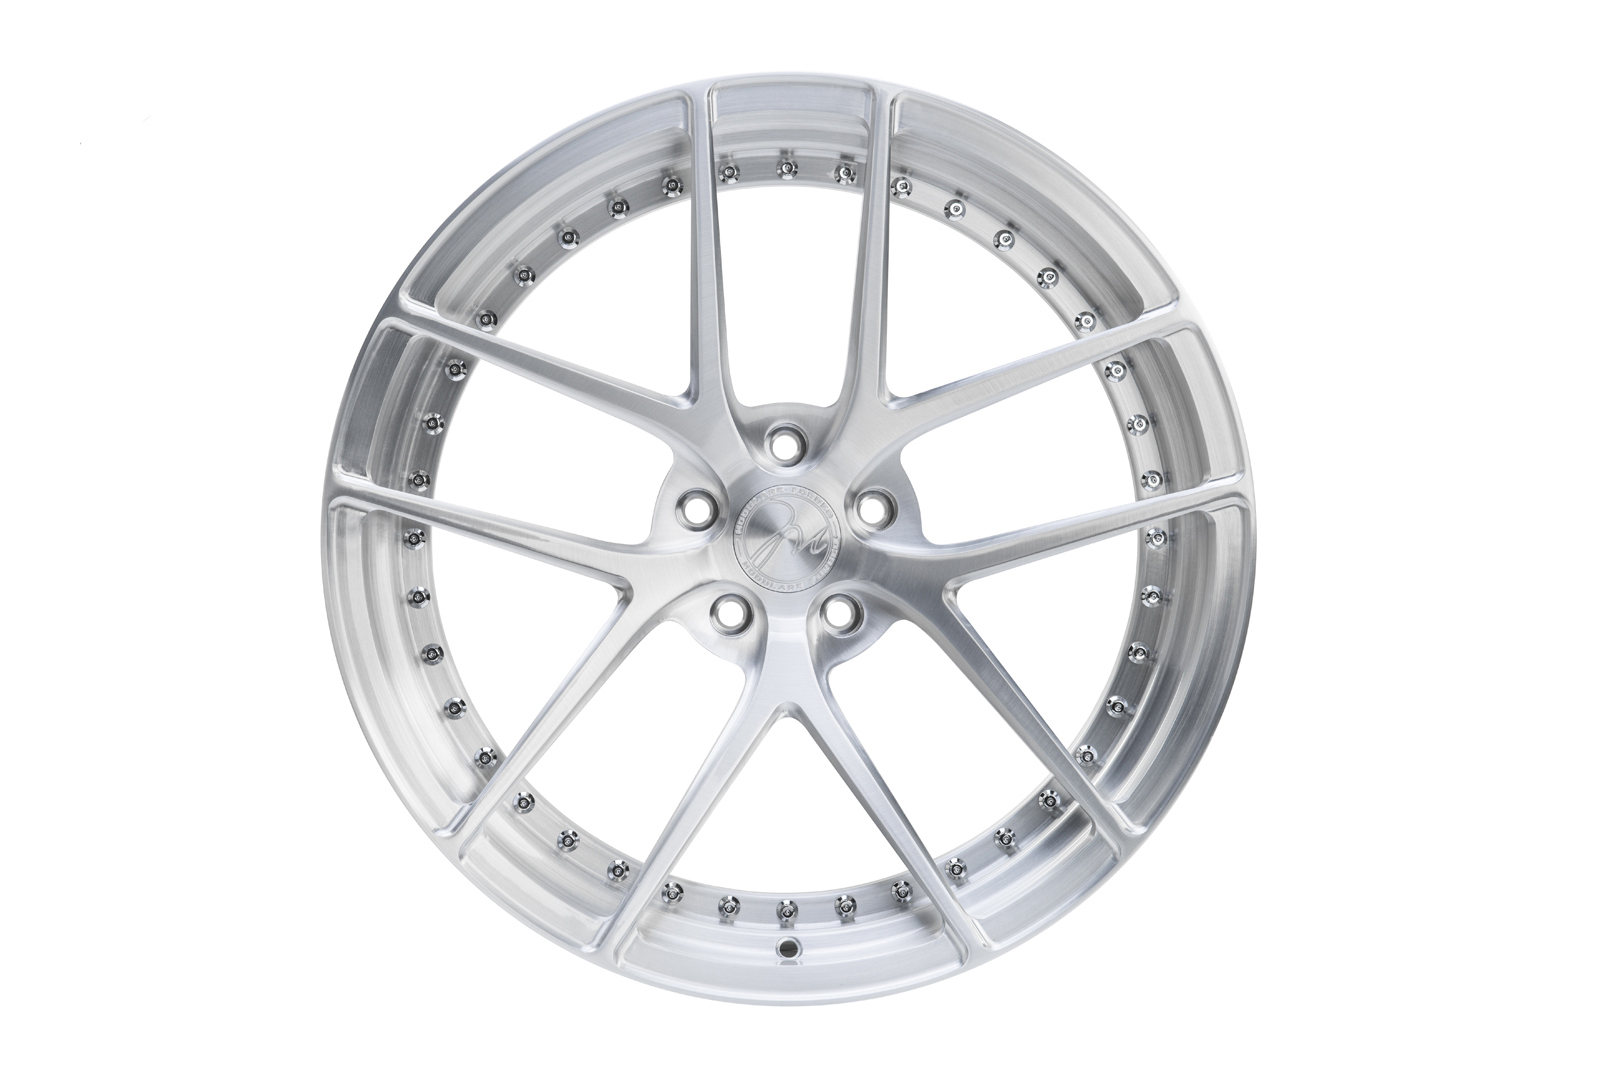 Modulare D18 forged wheels